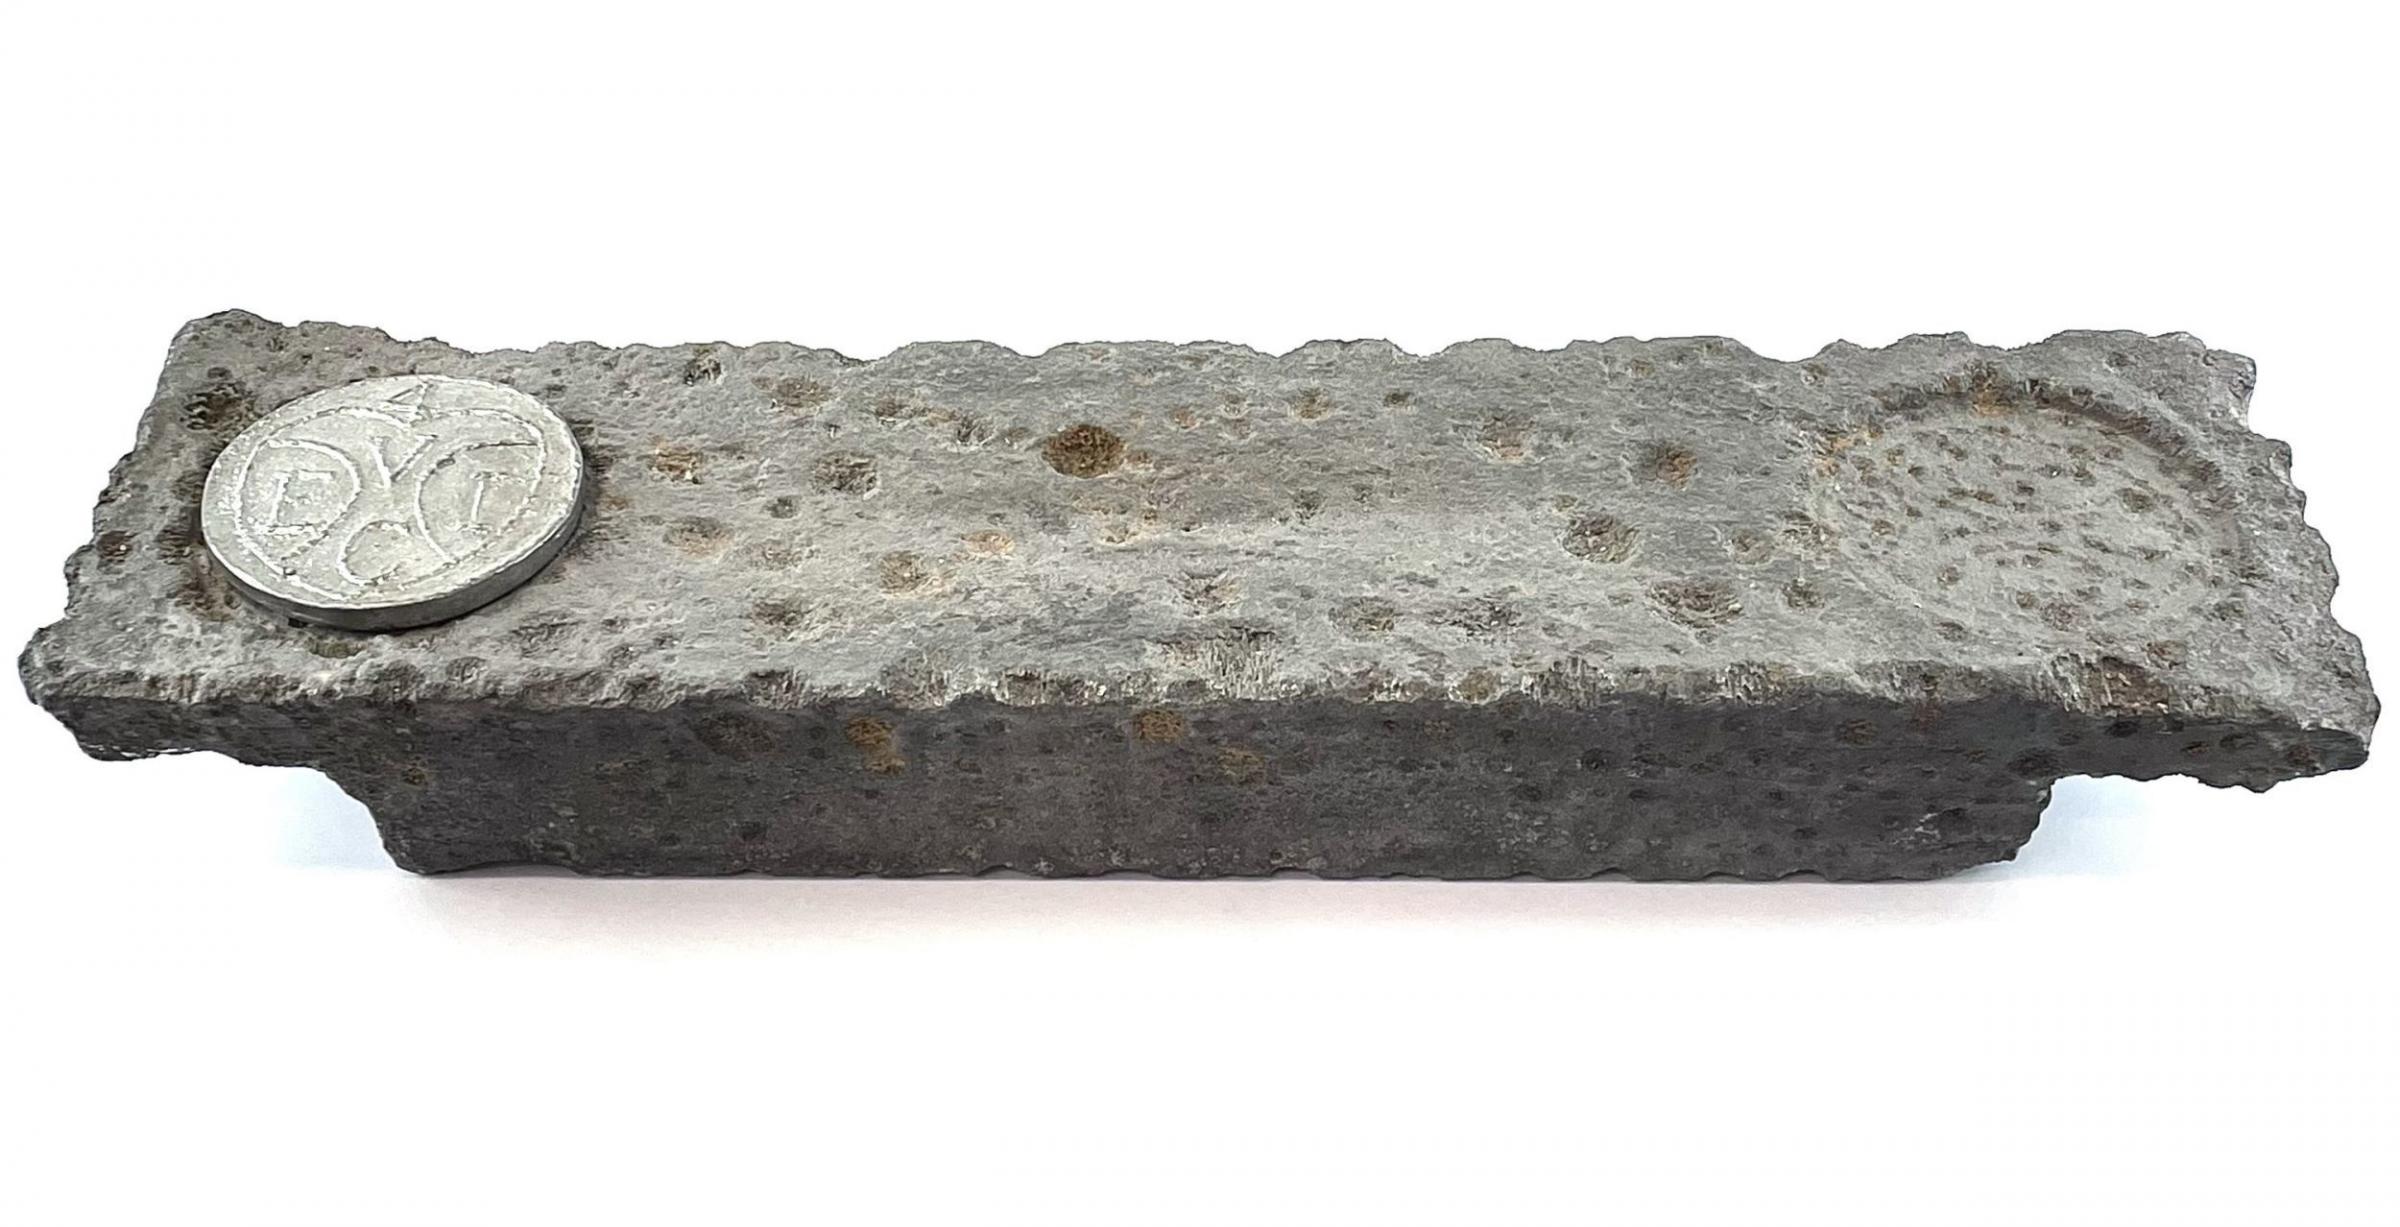 The ingot recovered from the wreck of the HMS Abergavenny Picture: David Lay Auctions/PA